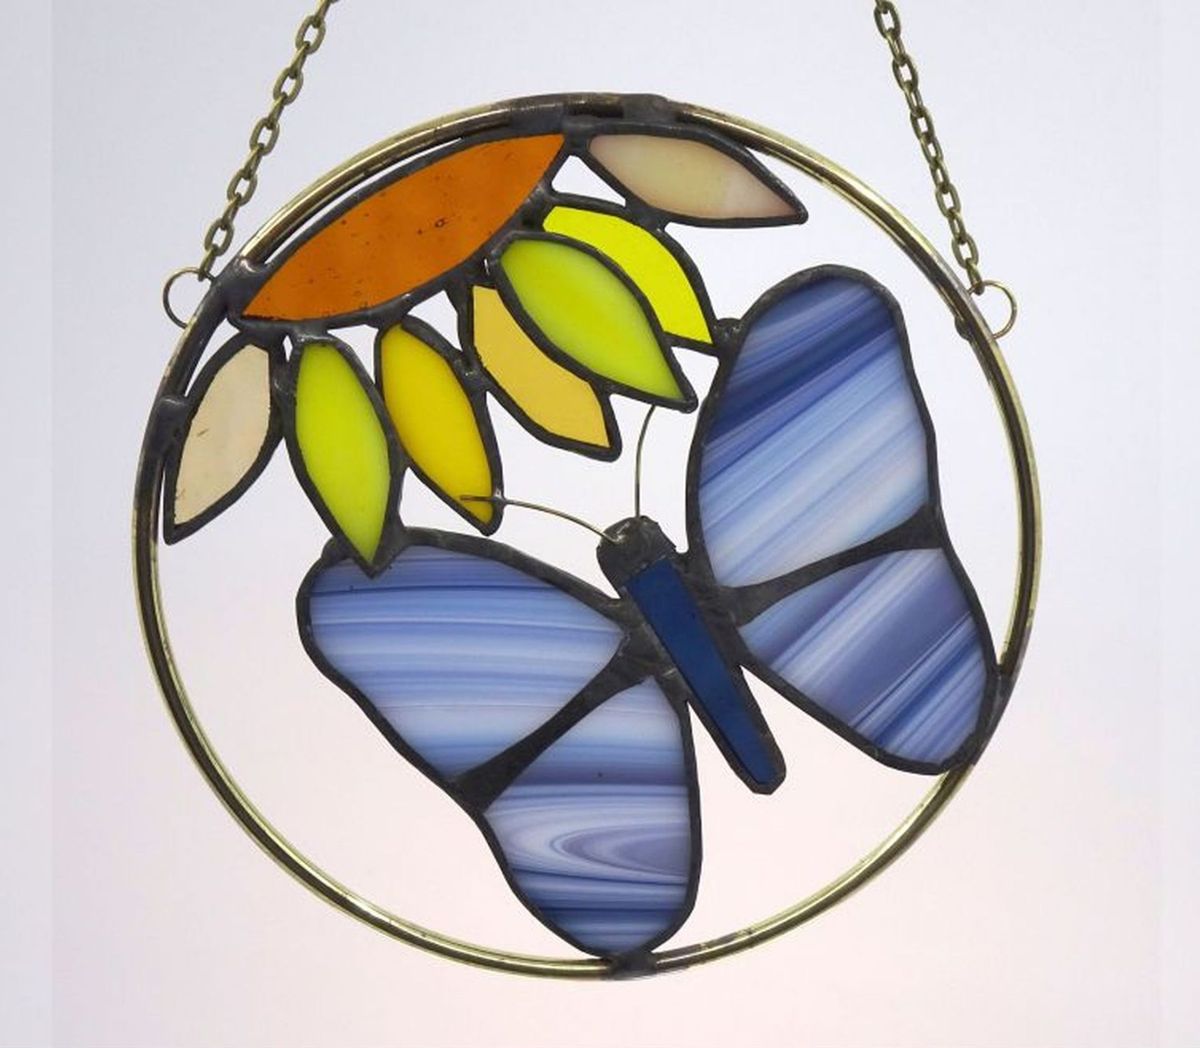 Weekday Series: \u201cSummer Delights Stained Glass\u201d